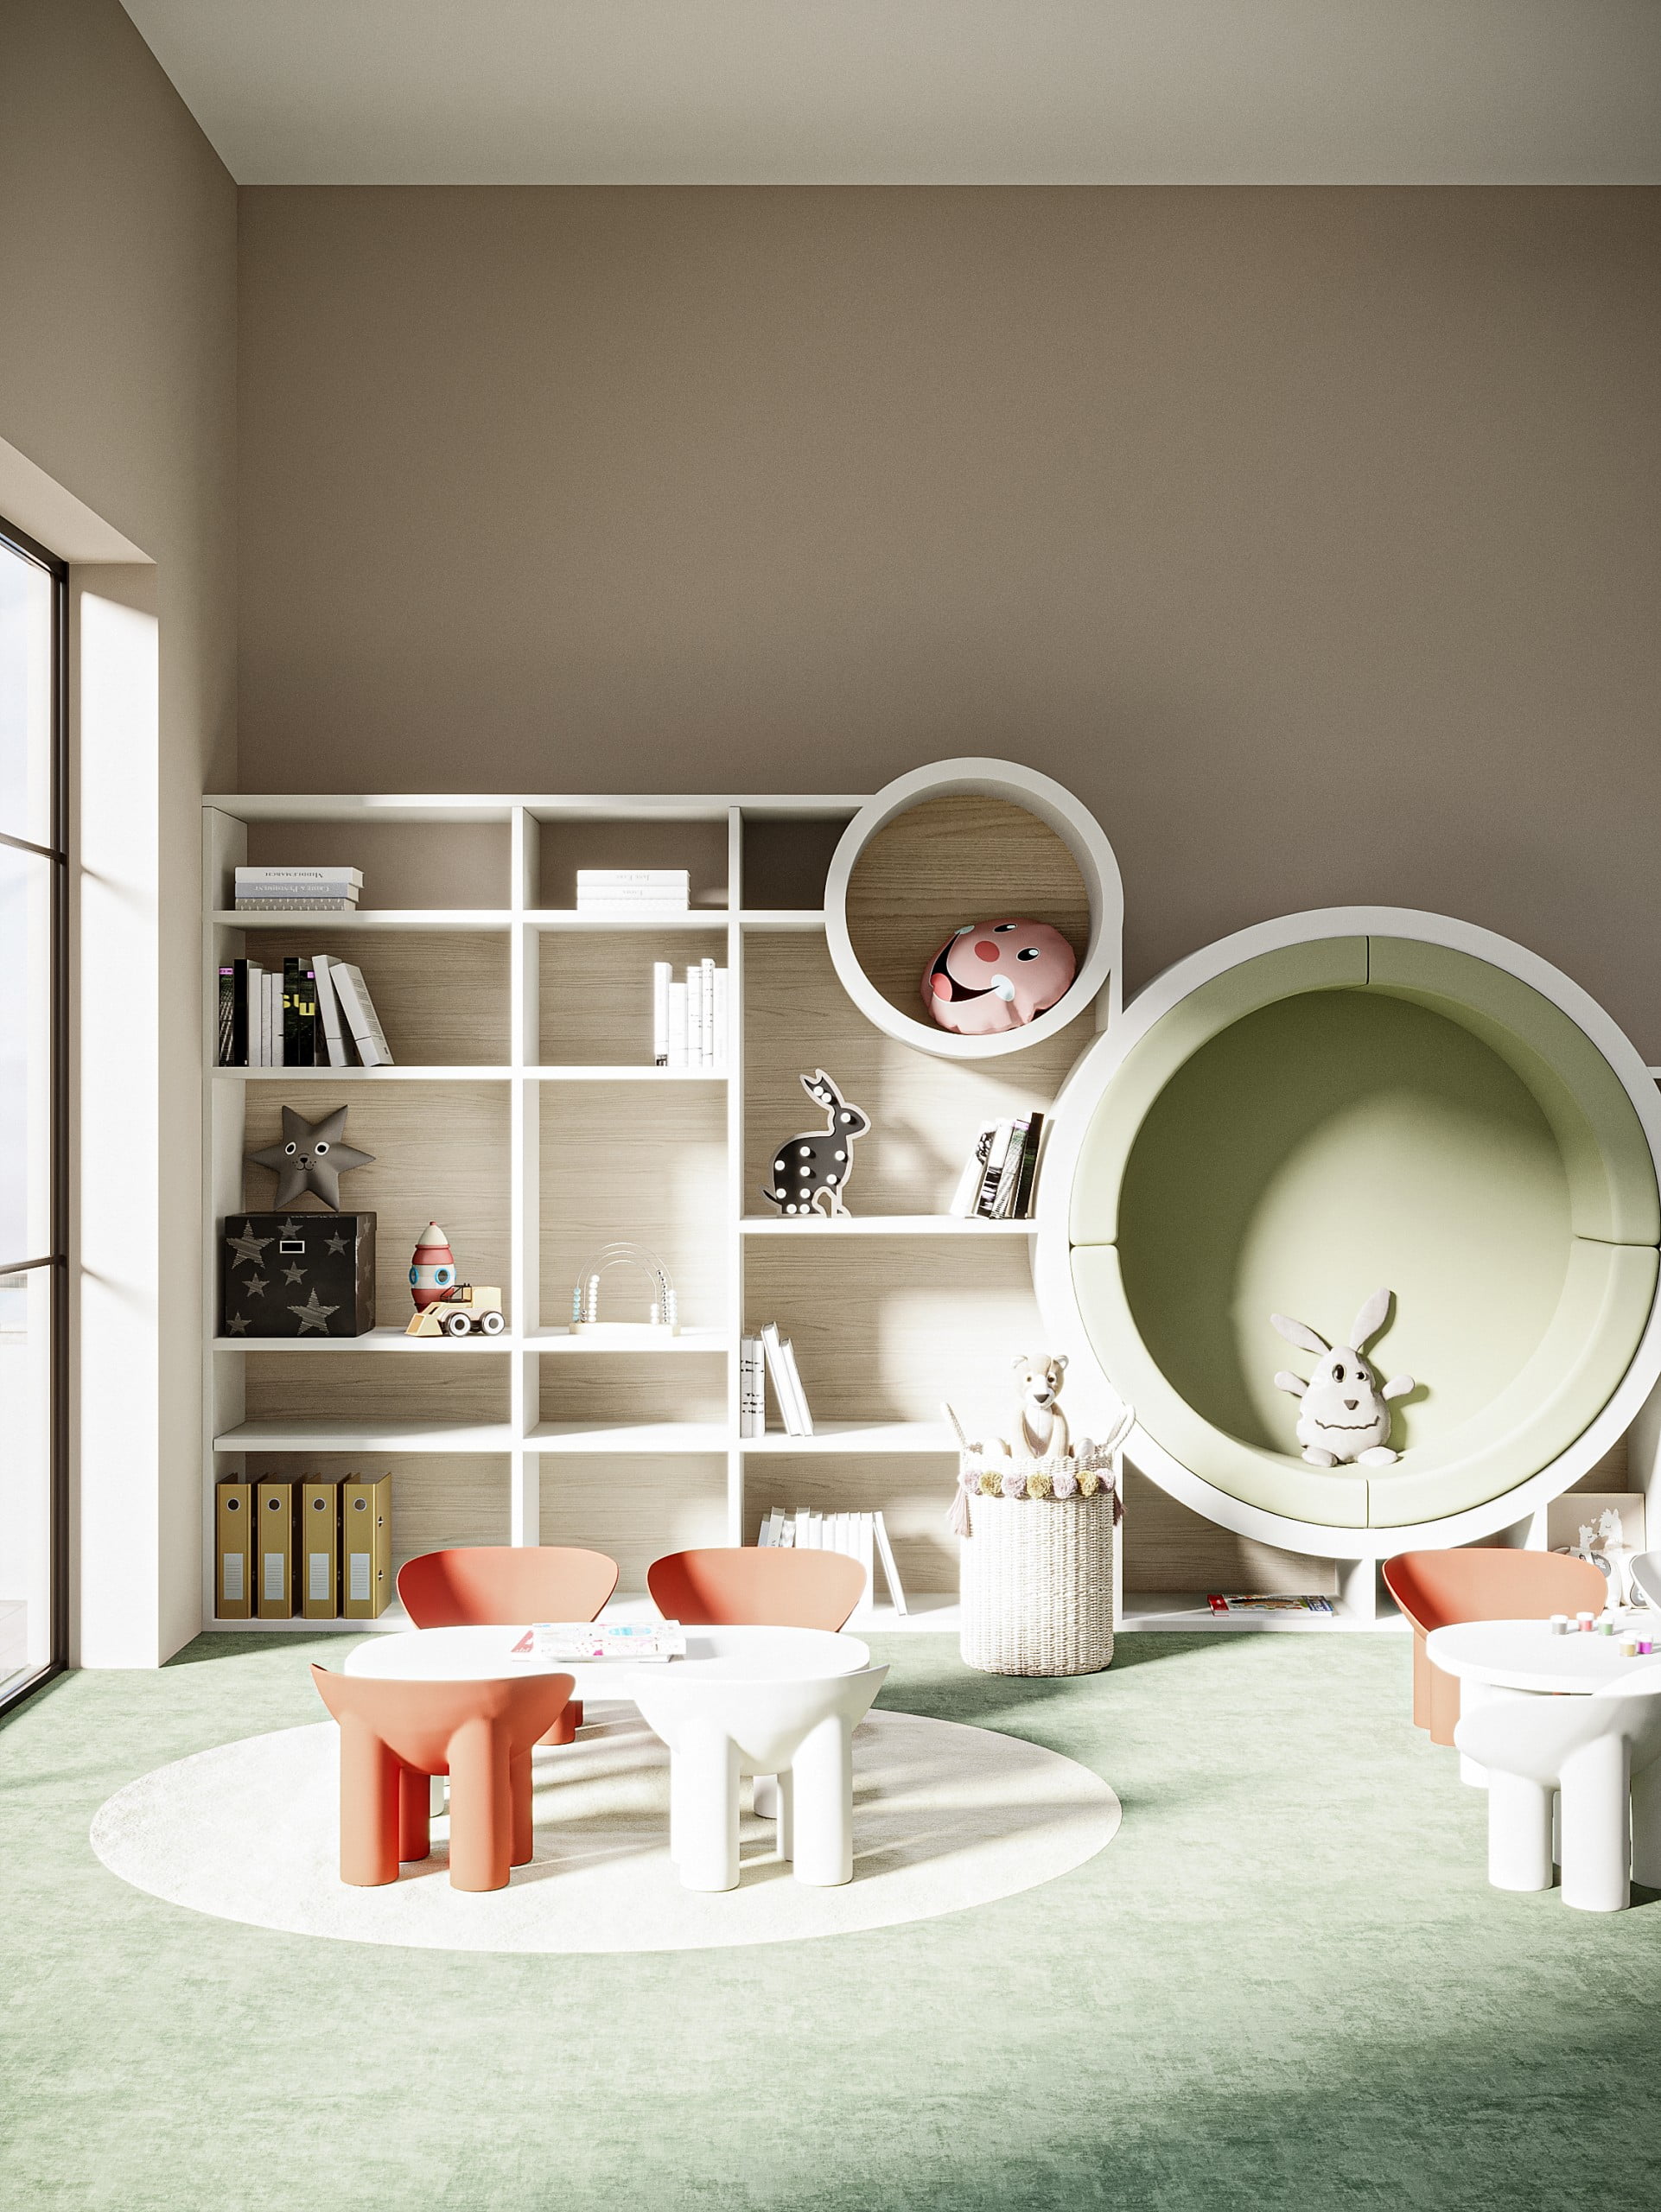 Kids Play Room scaled - Immobilier Dubai